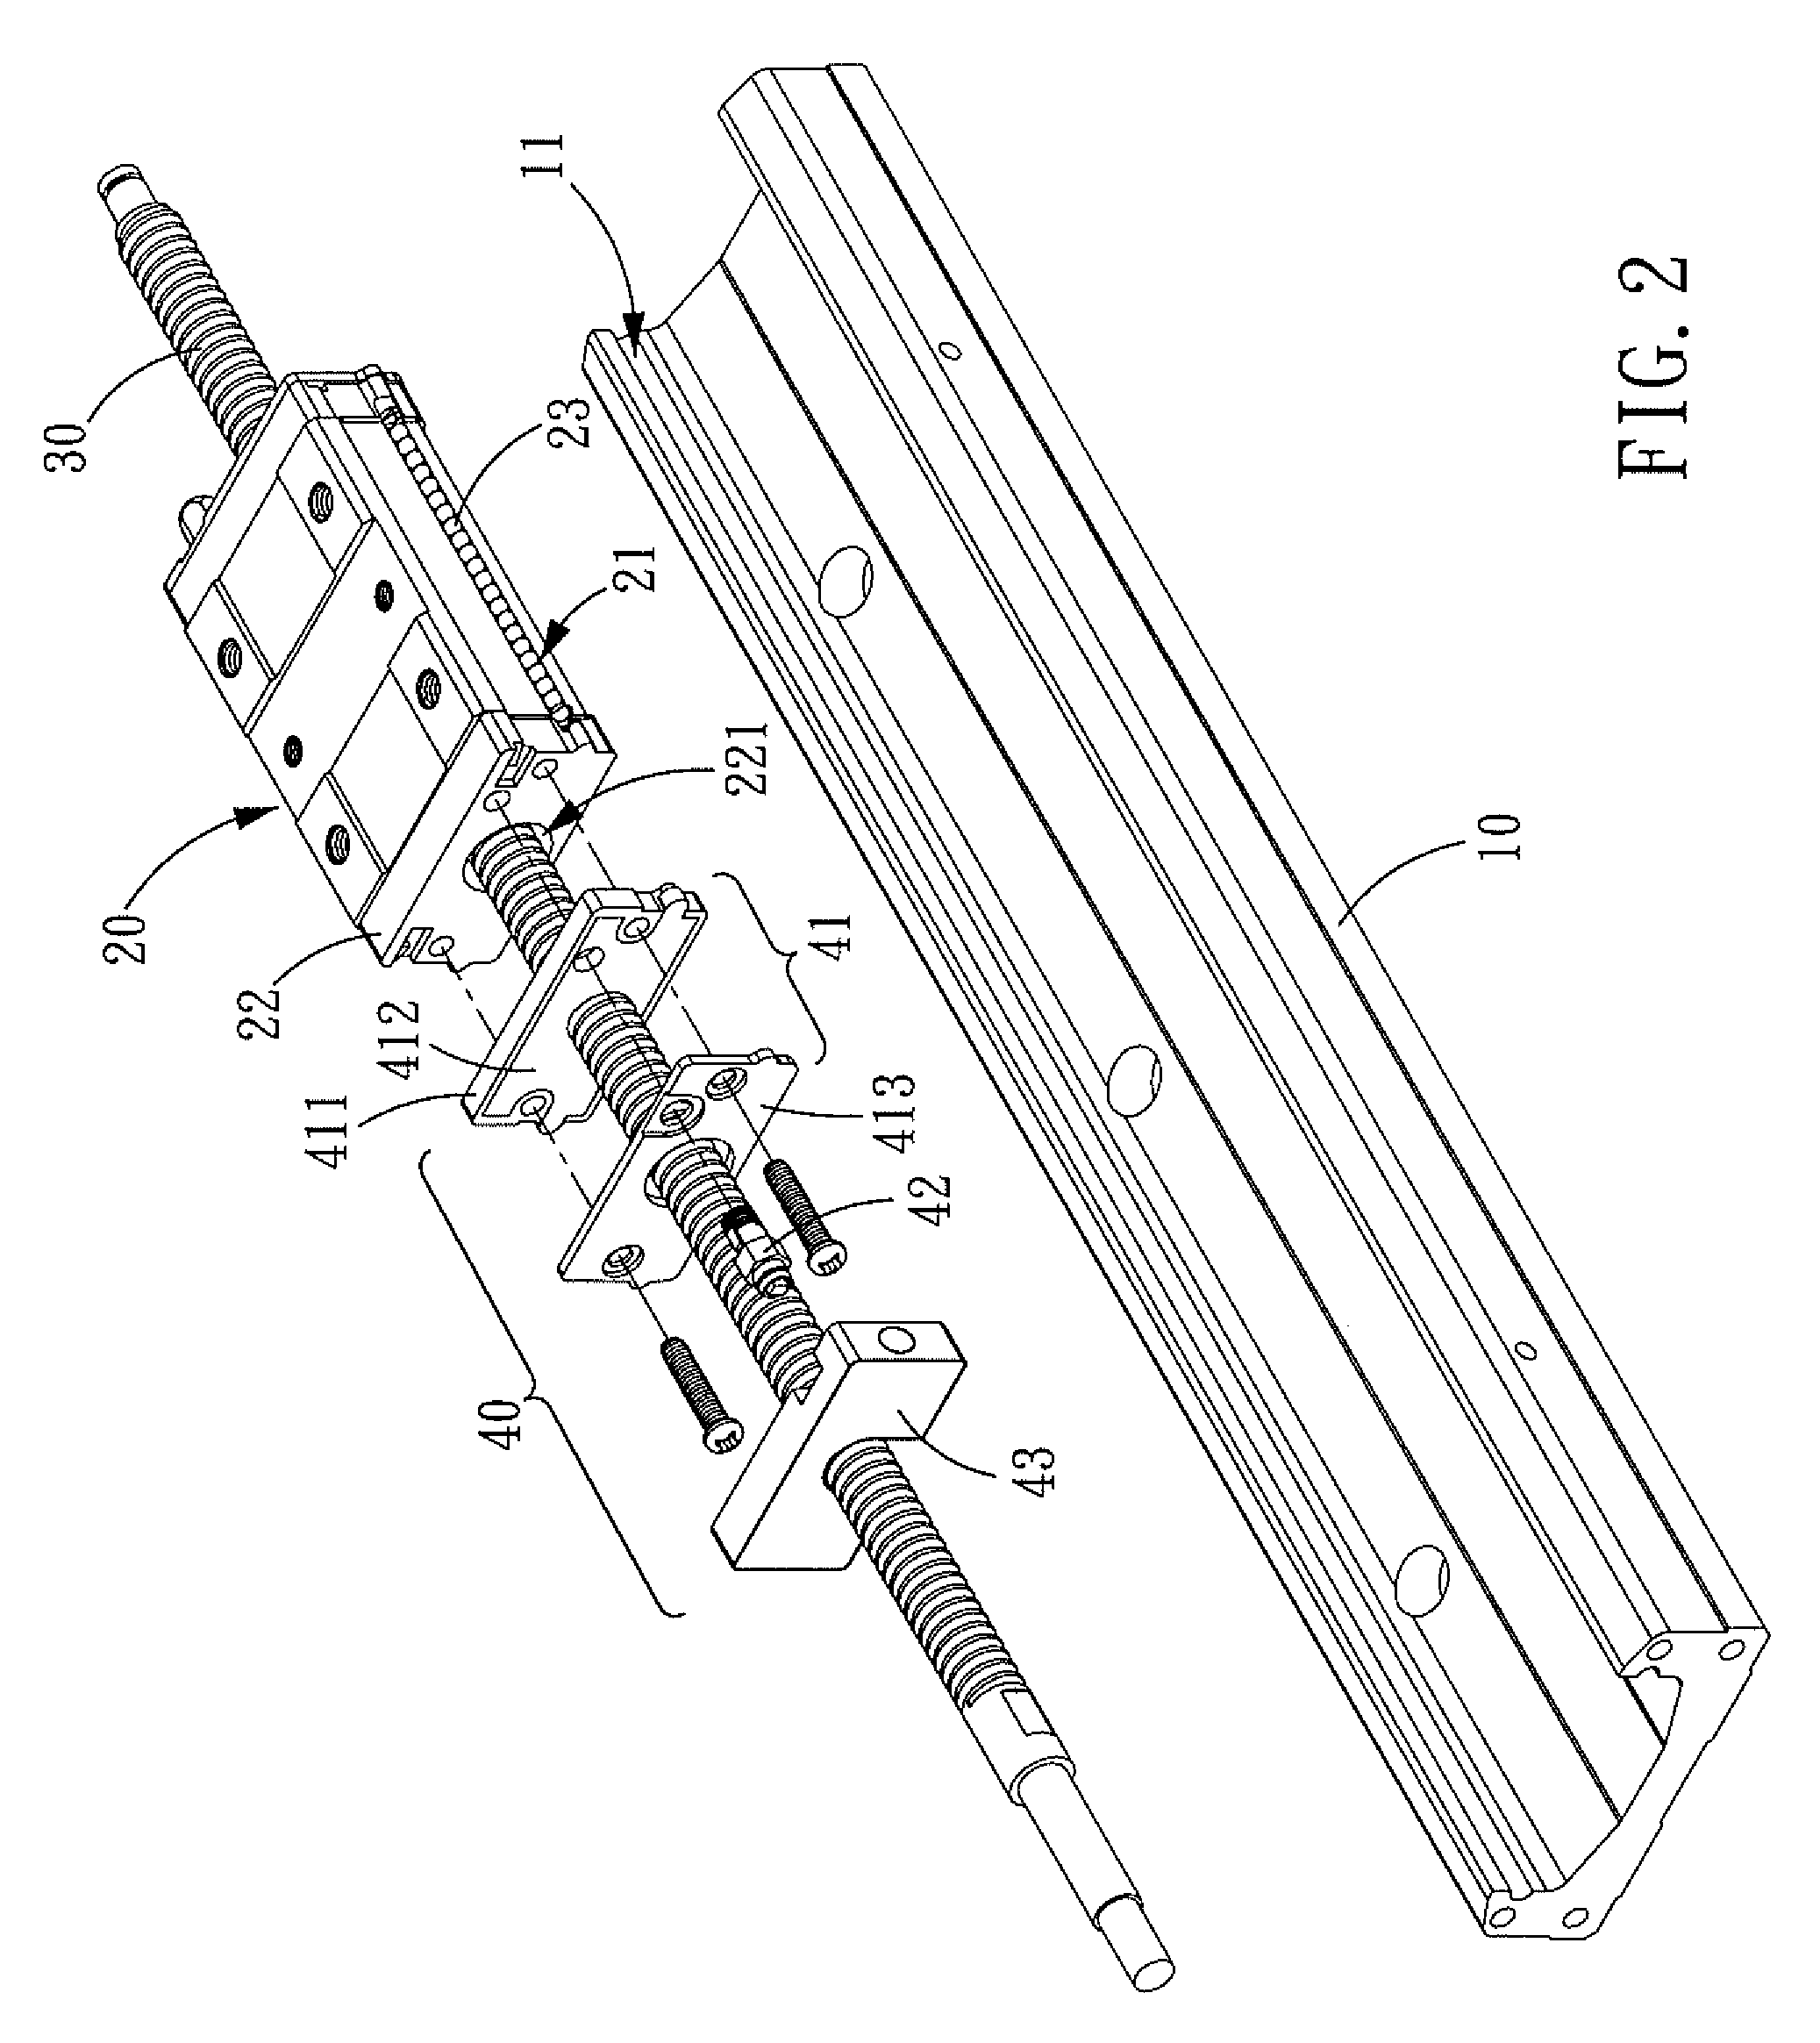 Linear driving device with a self-lubricating assembly